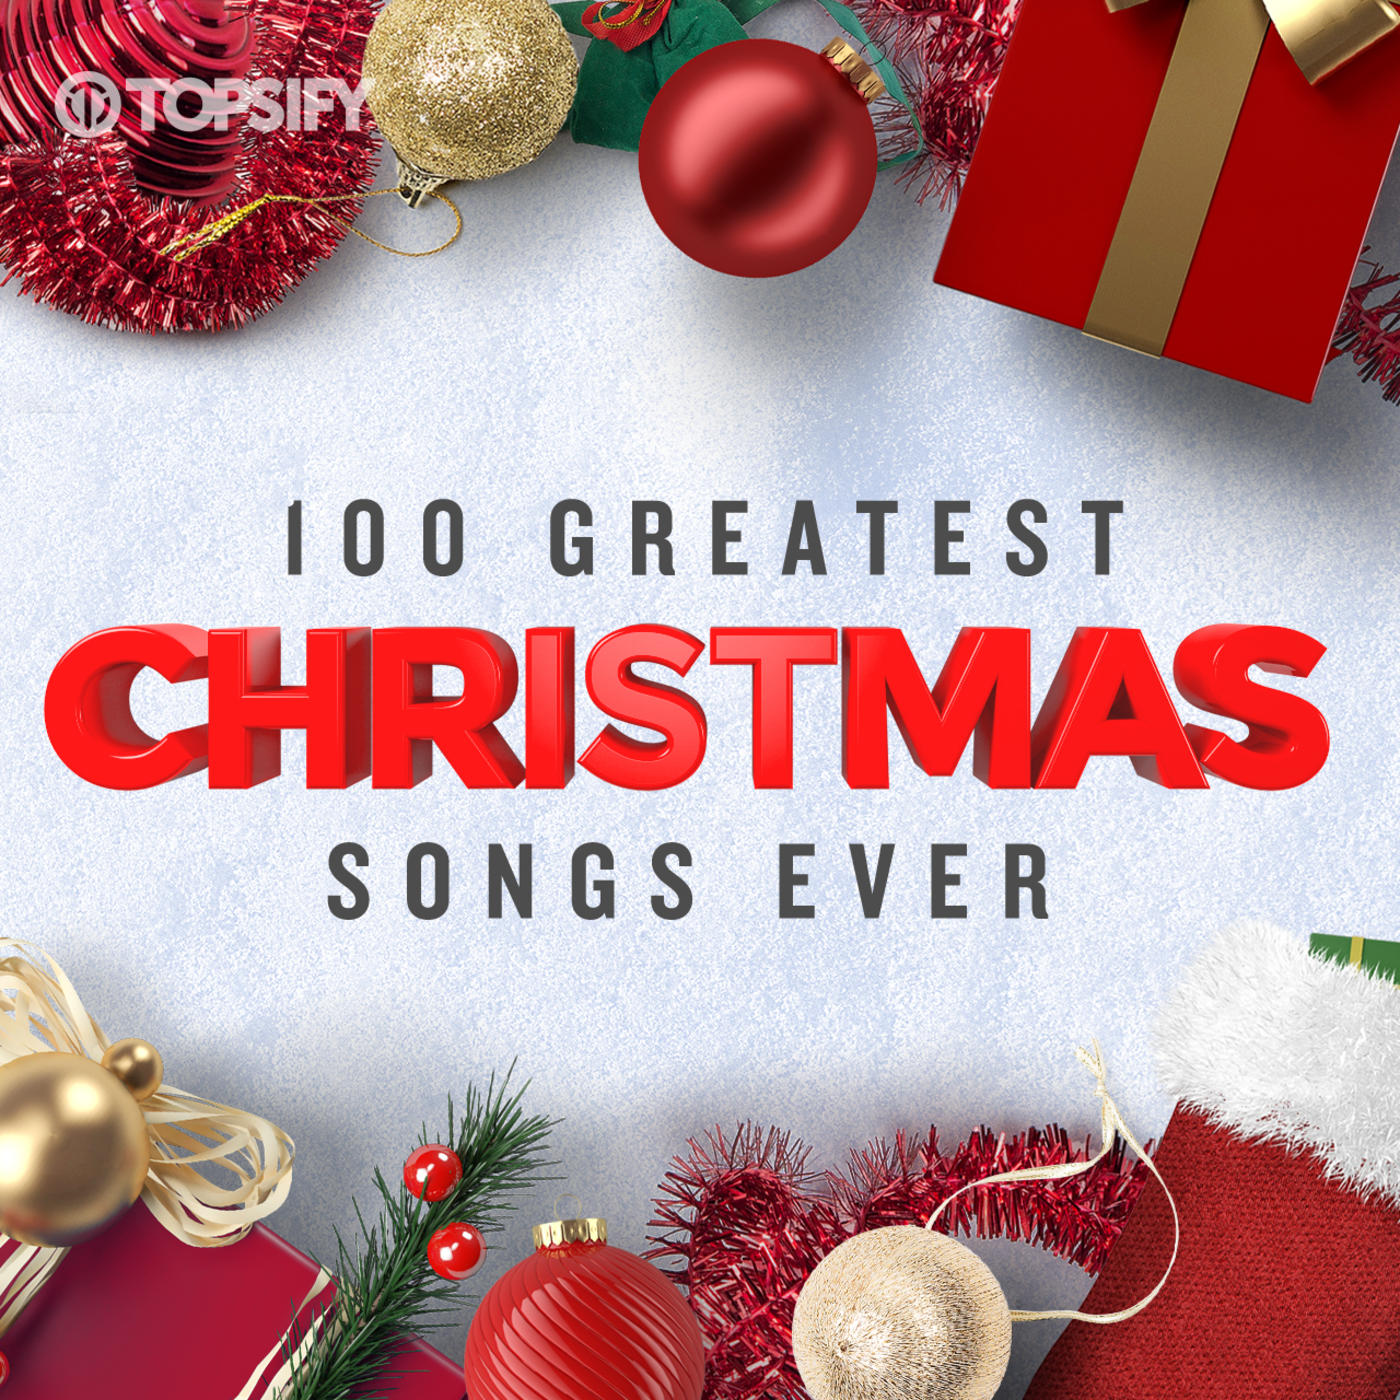 80s HITS - 100 Greatest Songs of the 1980s - playlist by Topsify